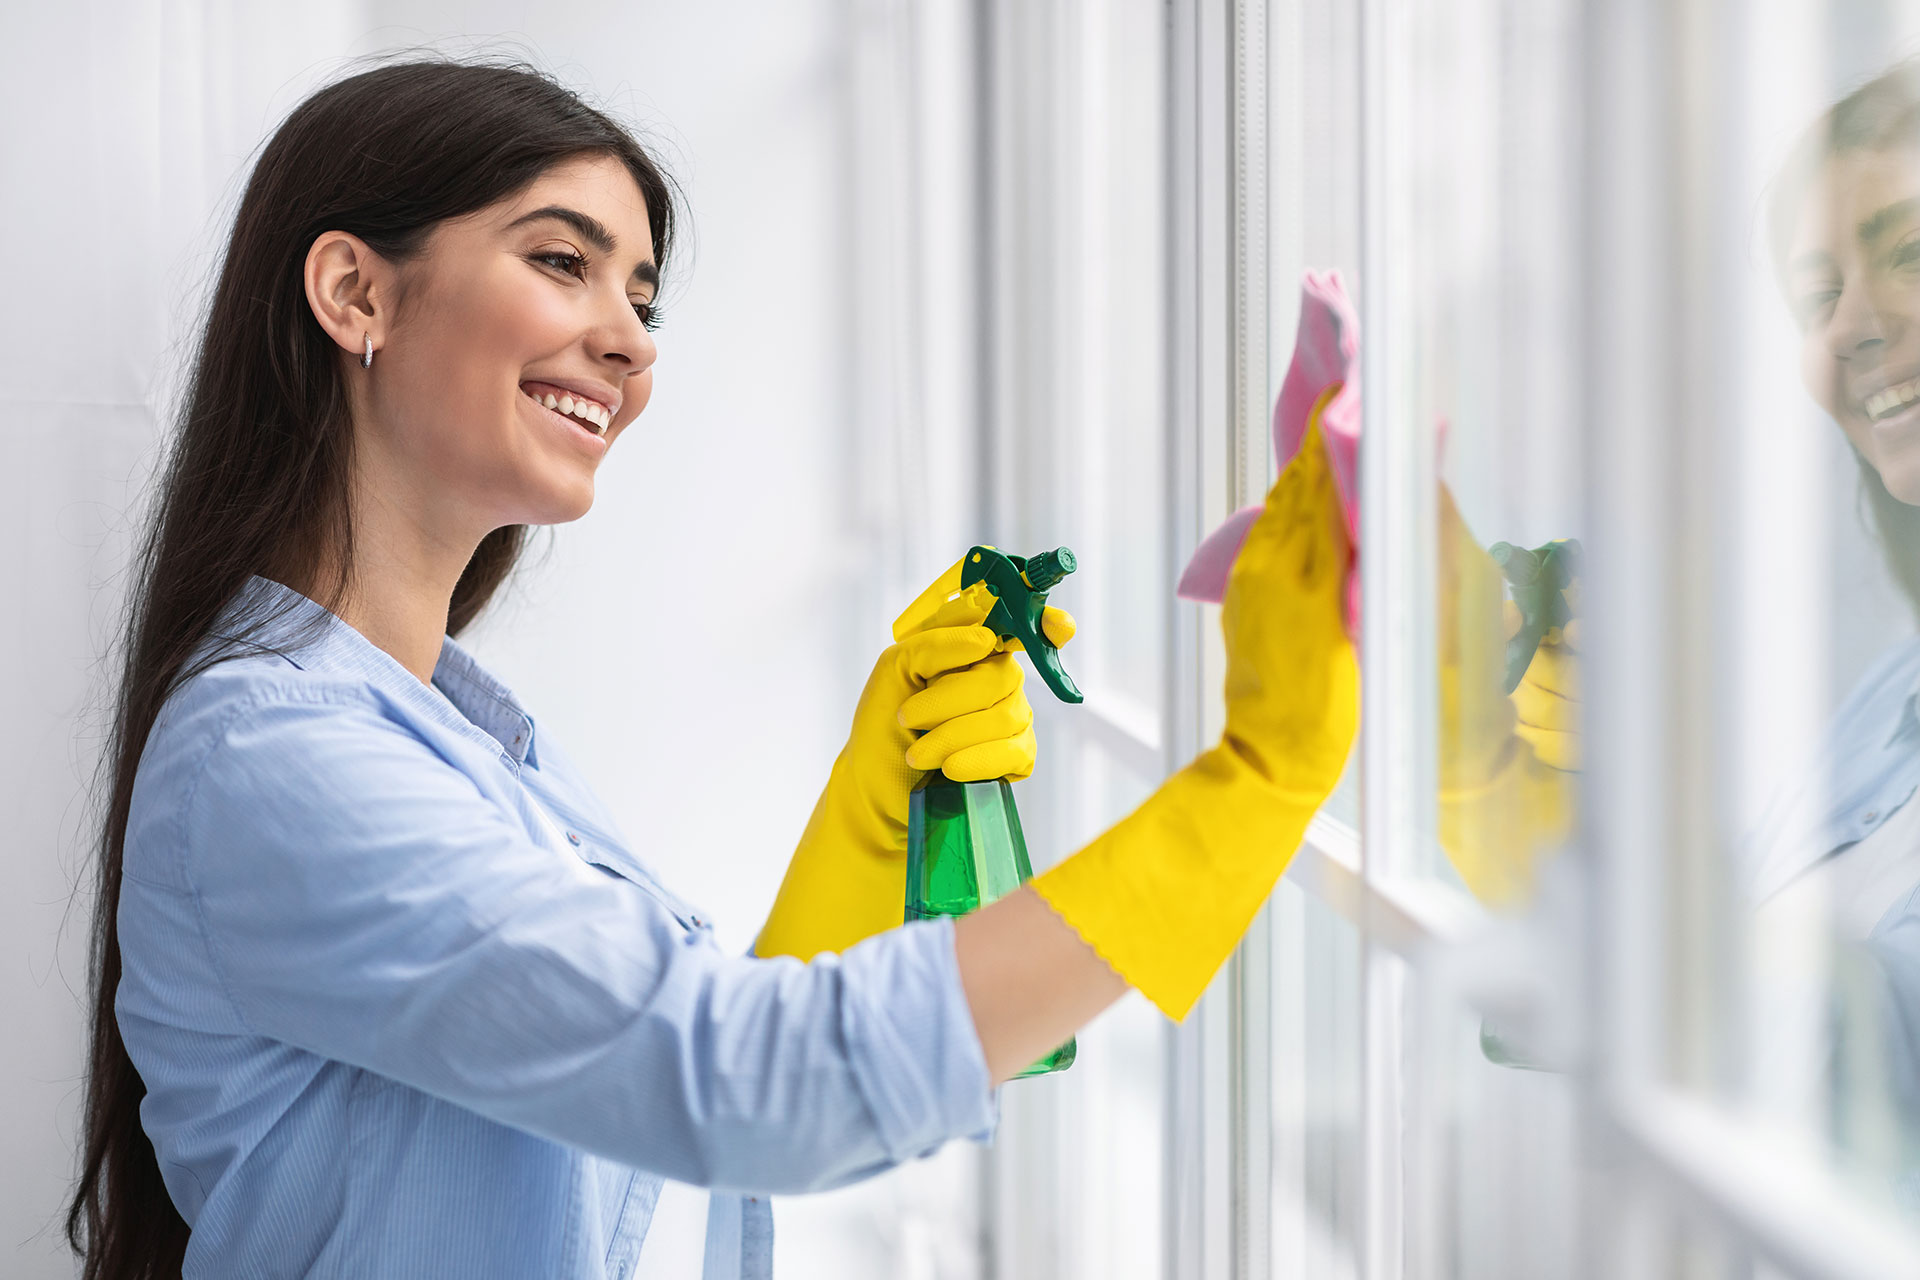 woman-cleaning-window-with-rag-and-cleanser-spray-2021-09-03-14-19-50-utc.jpg